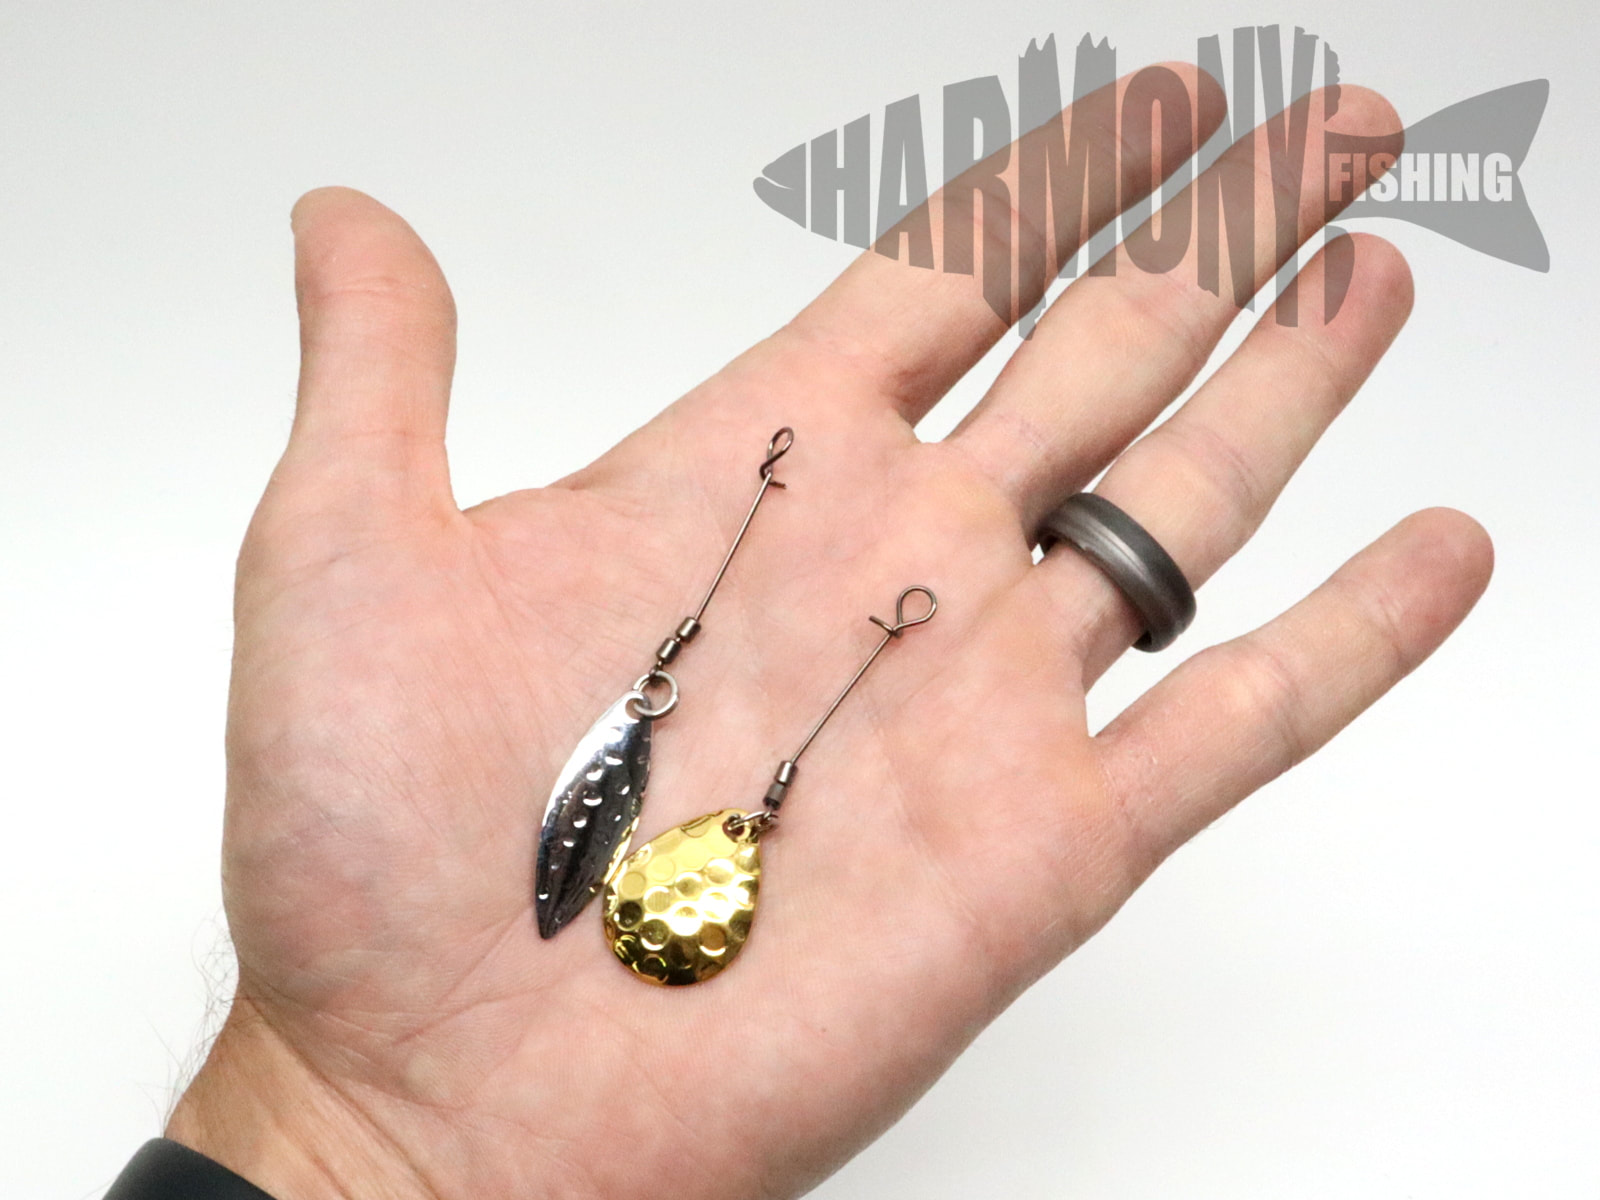 Harmony Fishing – Replacement blade assemblies for Razor Series